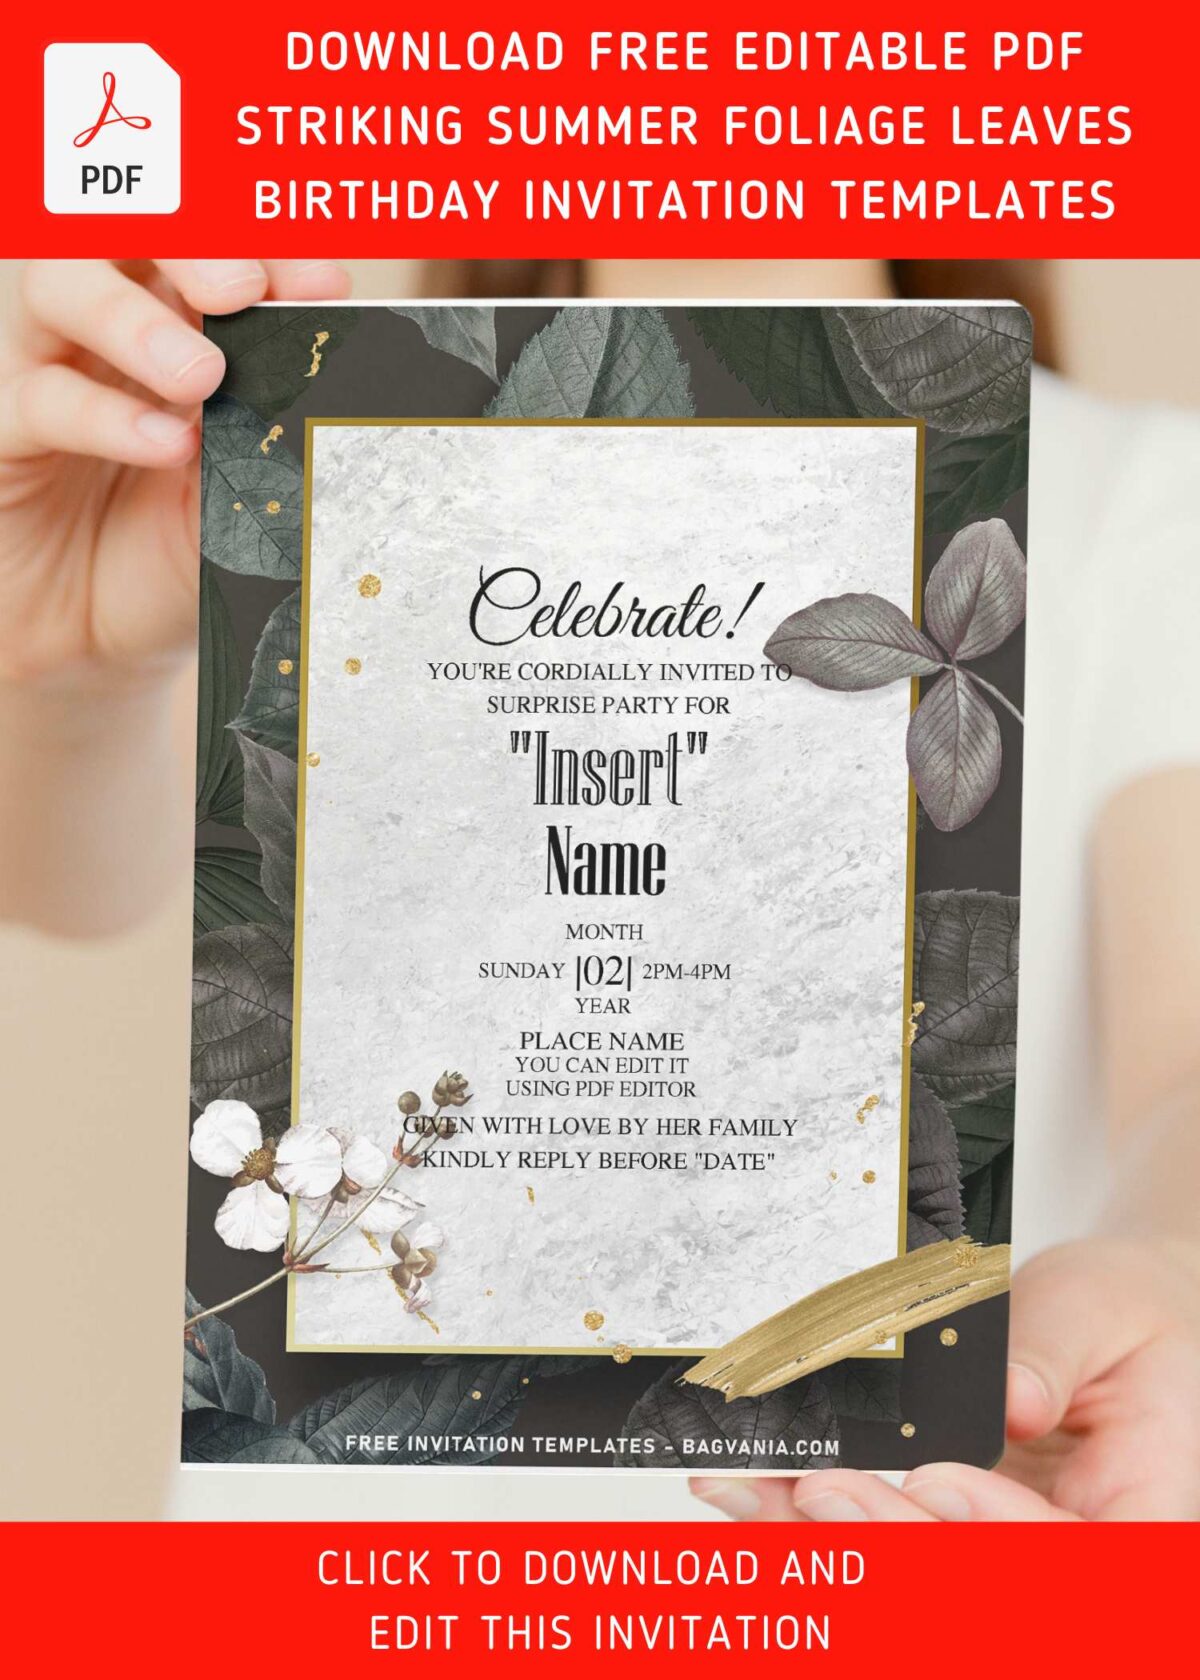 (Free Editable PDF) Glamorous Moody Summer Greenery & Floral Invitation Templates with editable text